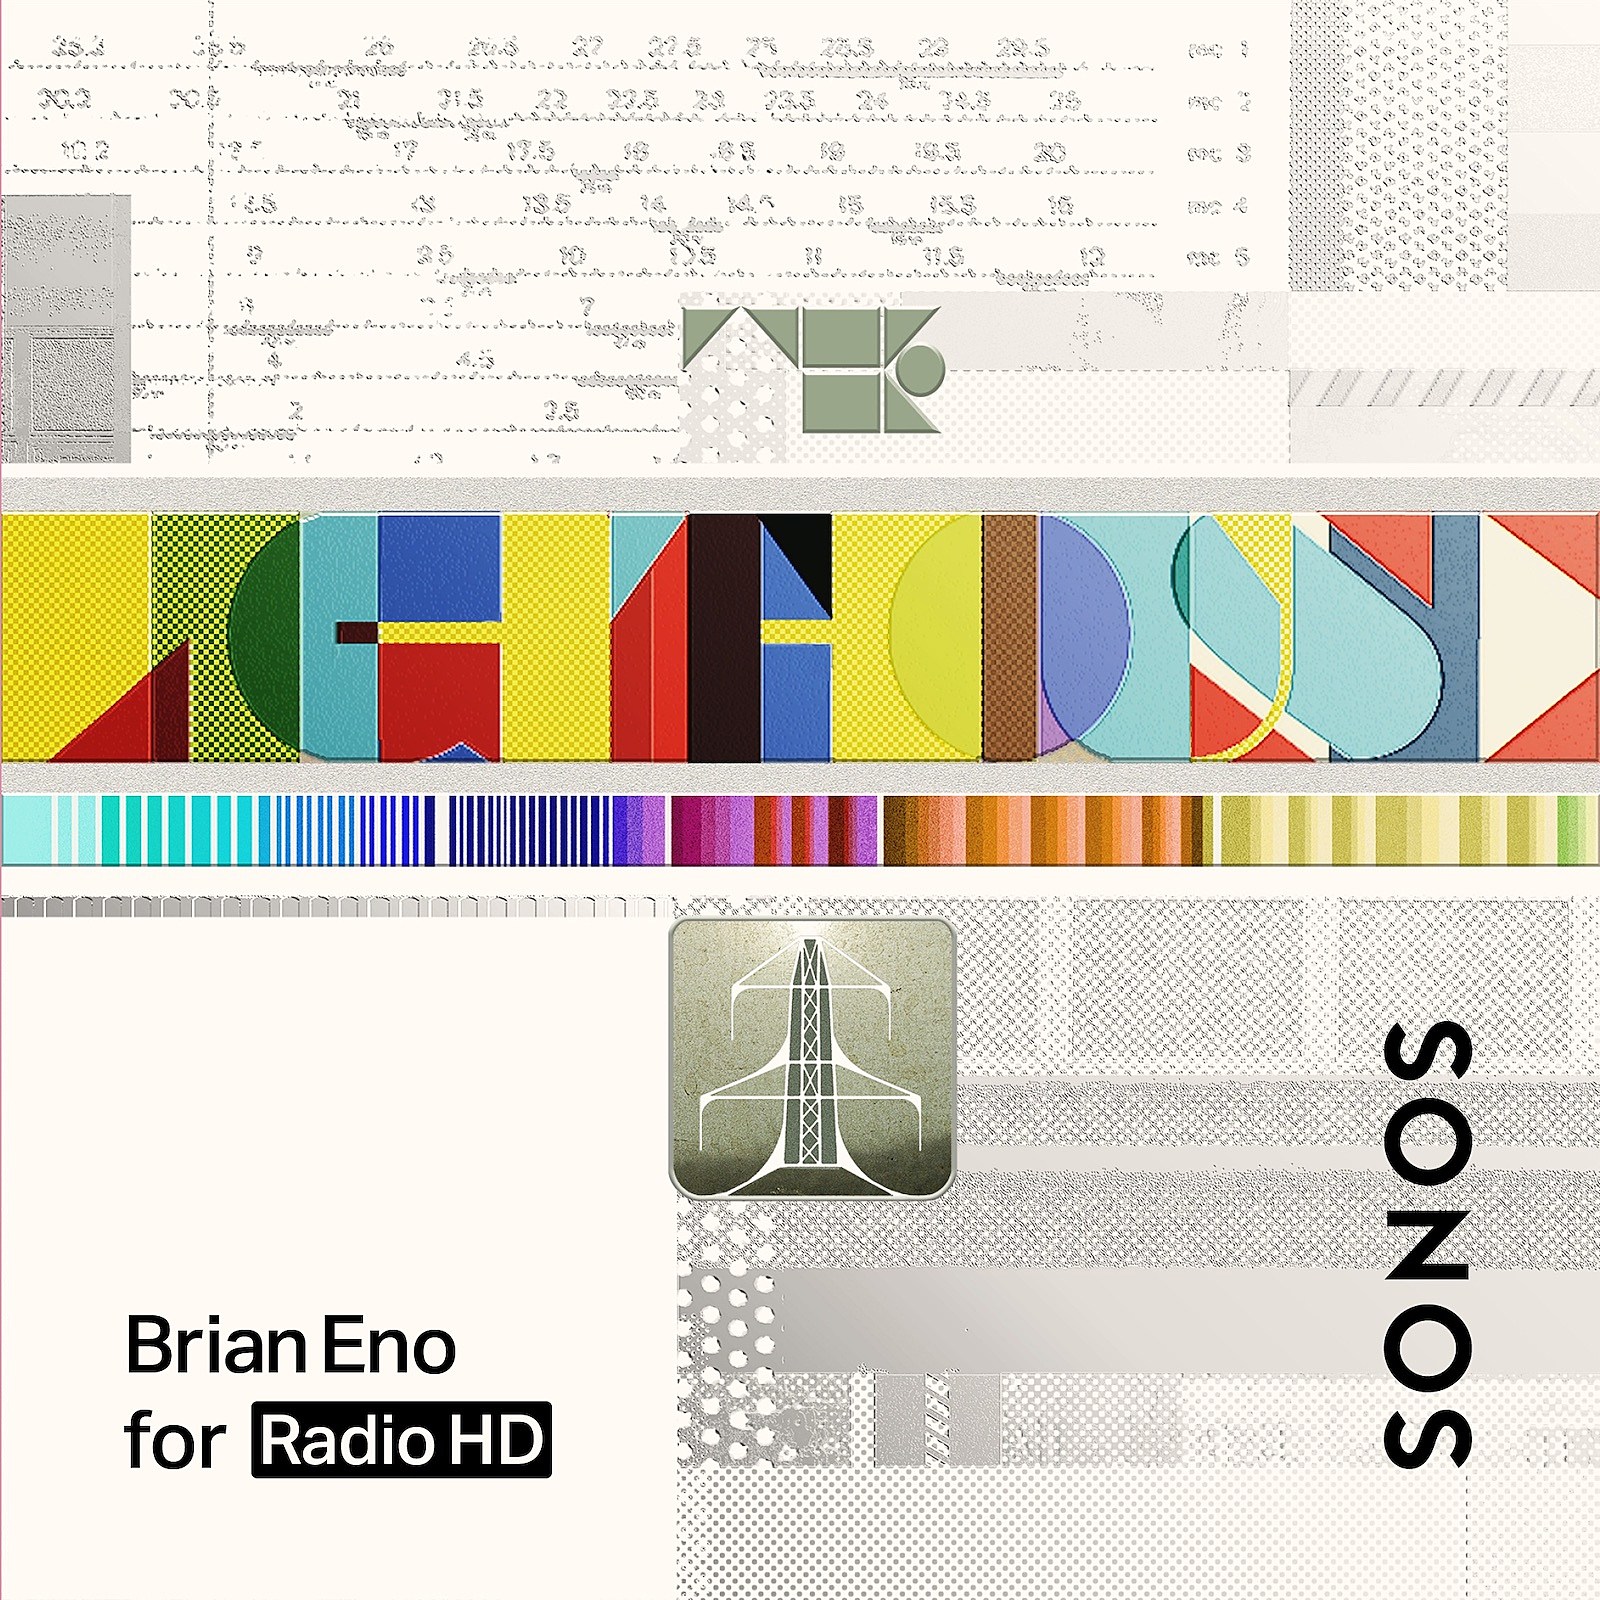 Brian Eno launches Sonos Radio station featuring “decades of unreleased  music”